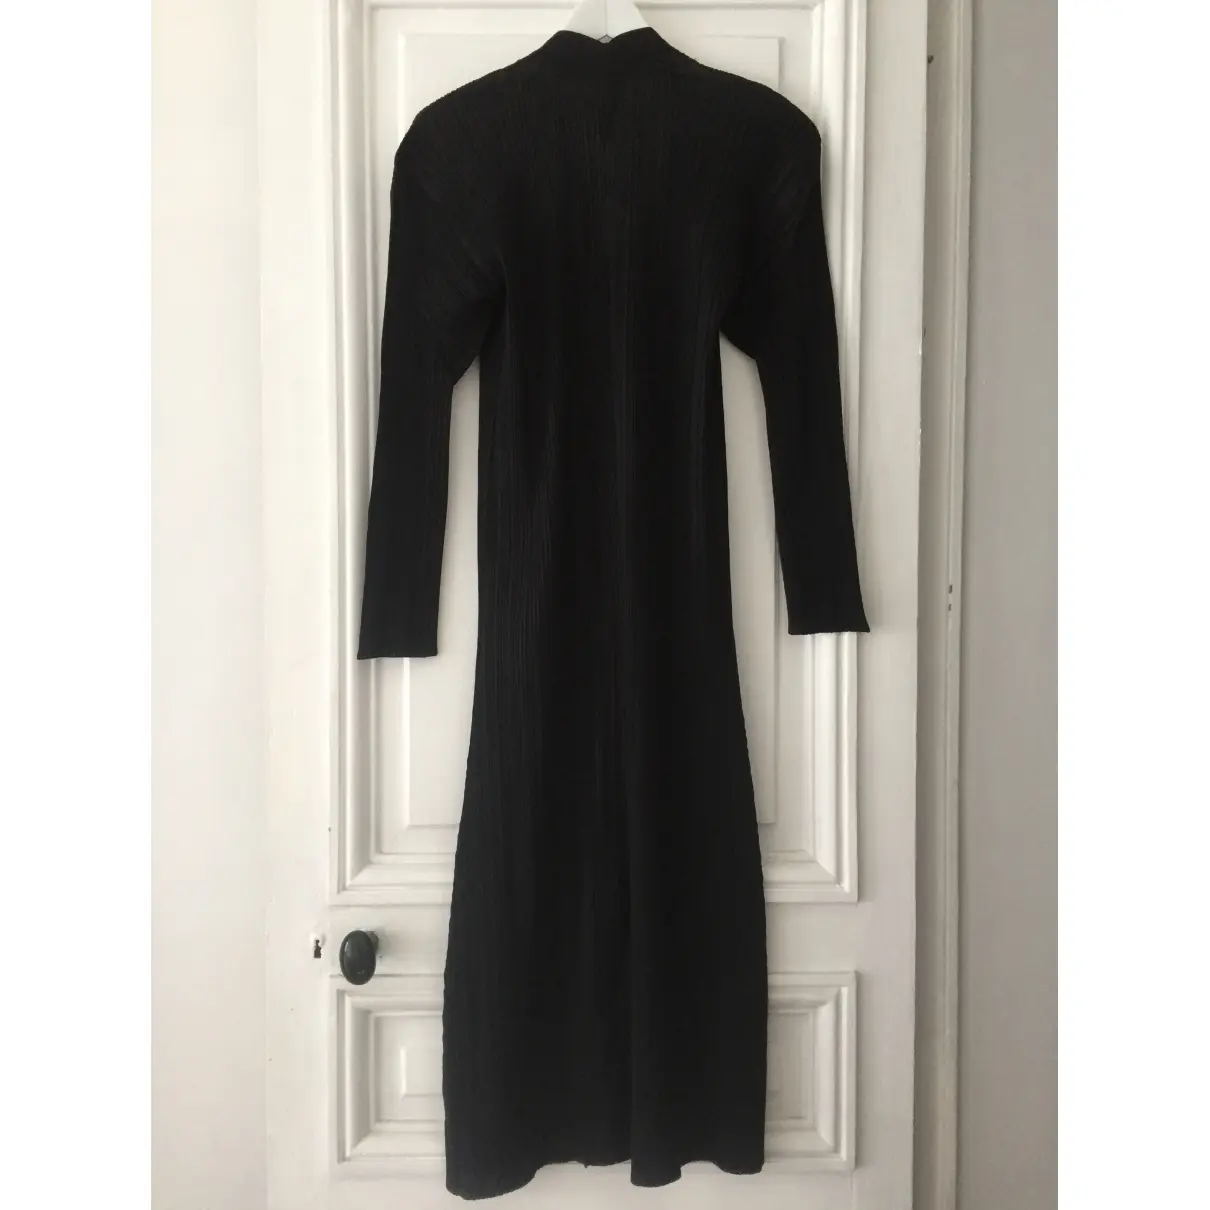 Issey Miyake Mid-length dress for sale - Vintage